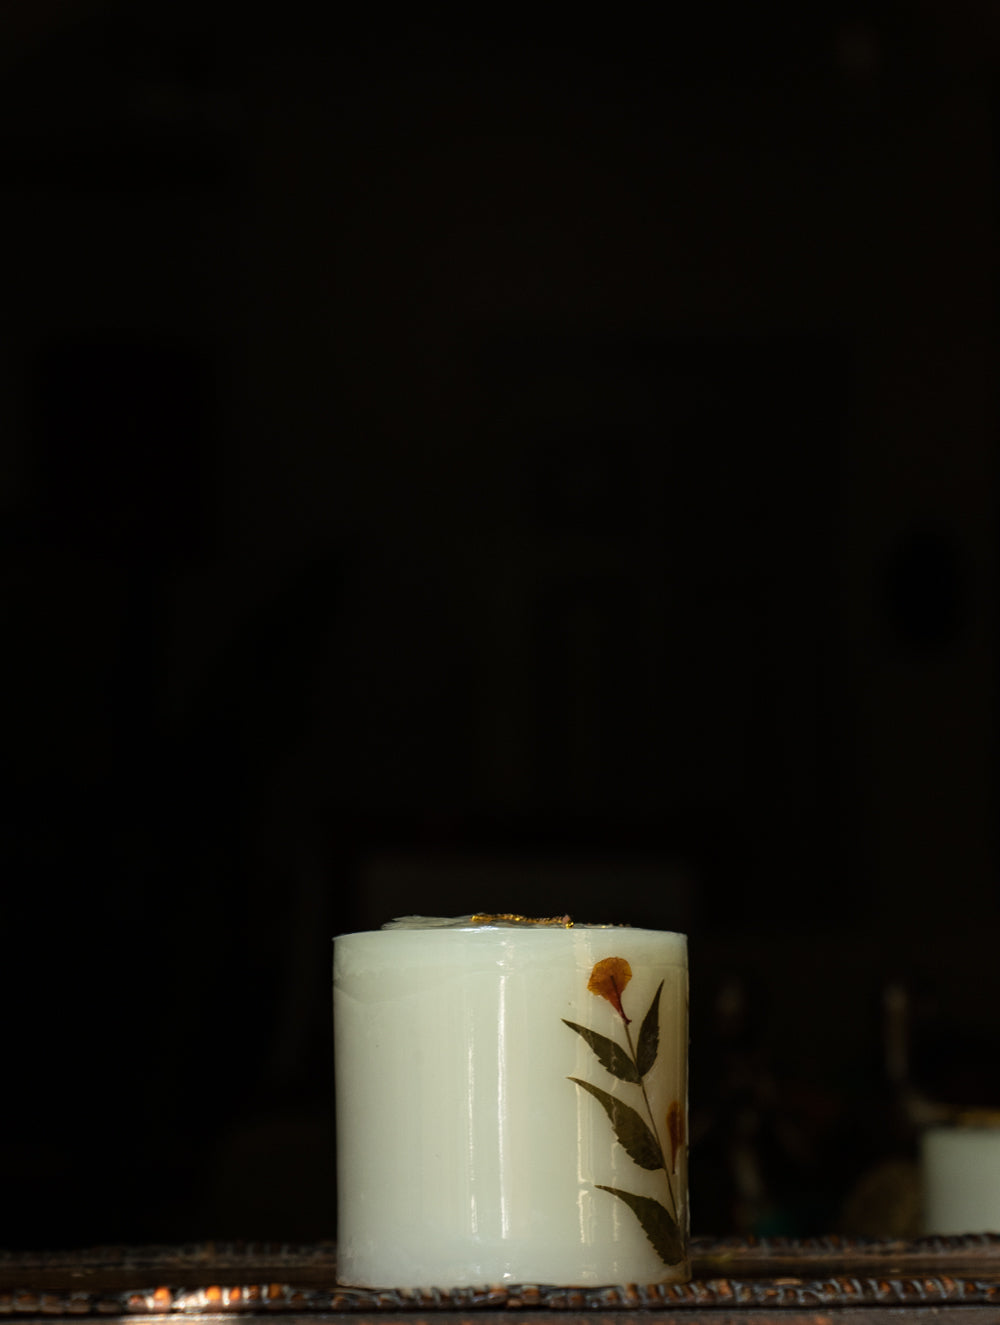 Load image into Gallery viewer, Aromatic Pondicherry Wax Pillar Candle - Lily - The India Craft House 